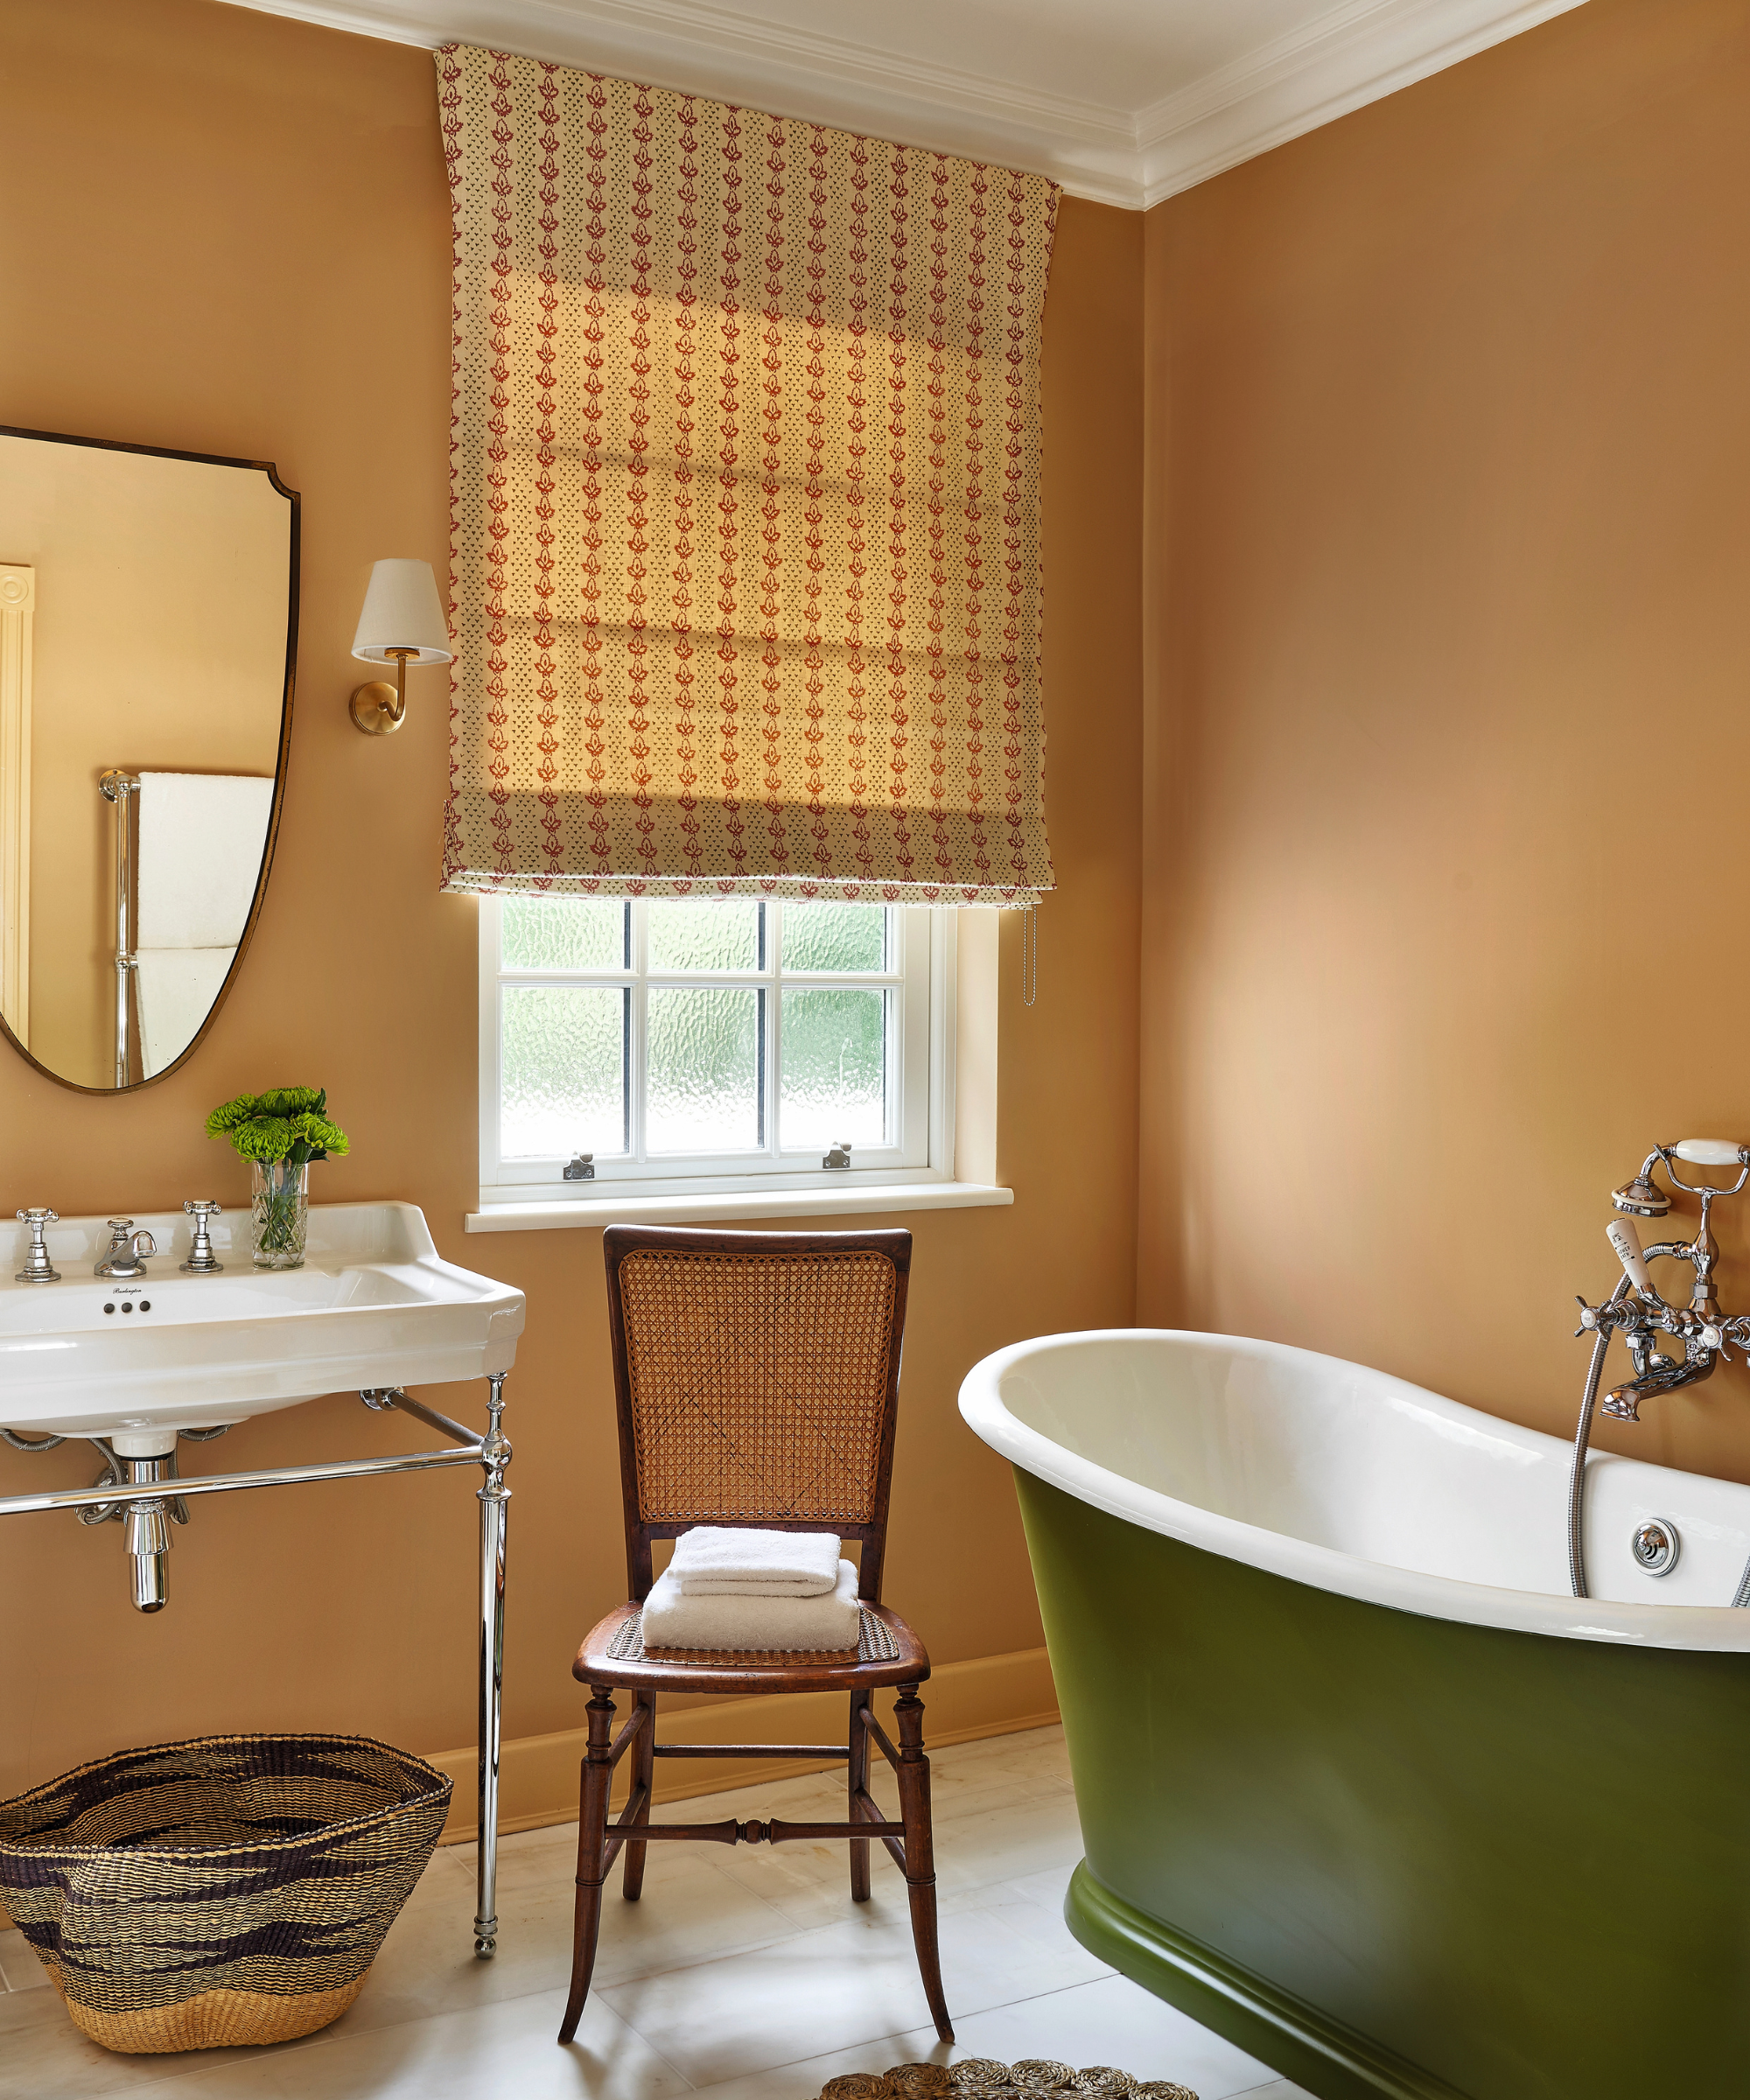 The interior of the bathroom is colored with green water and ocher wall